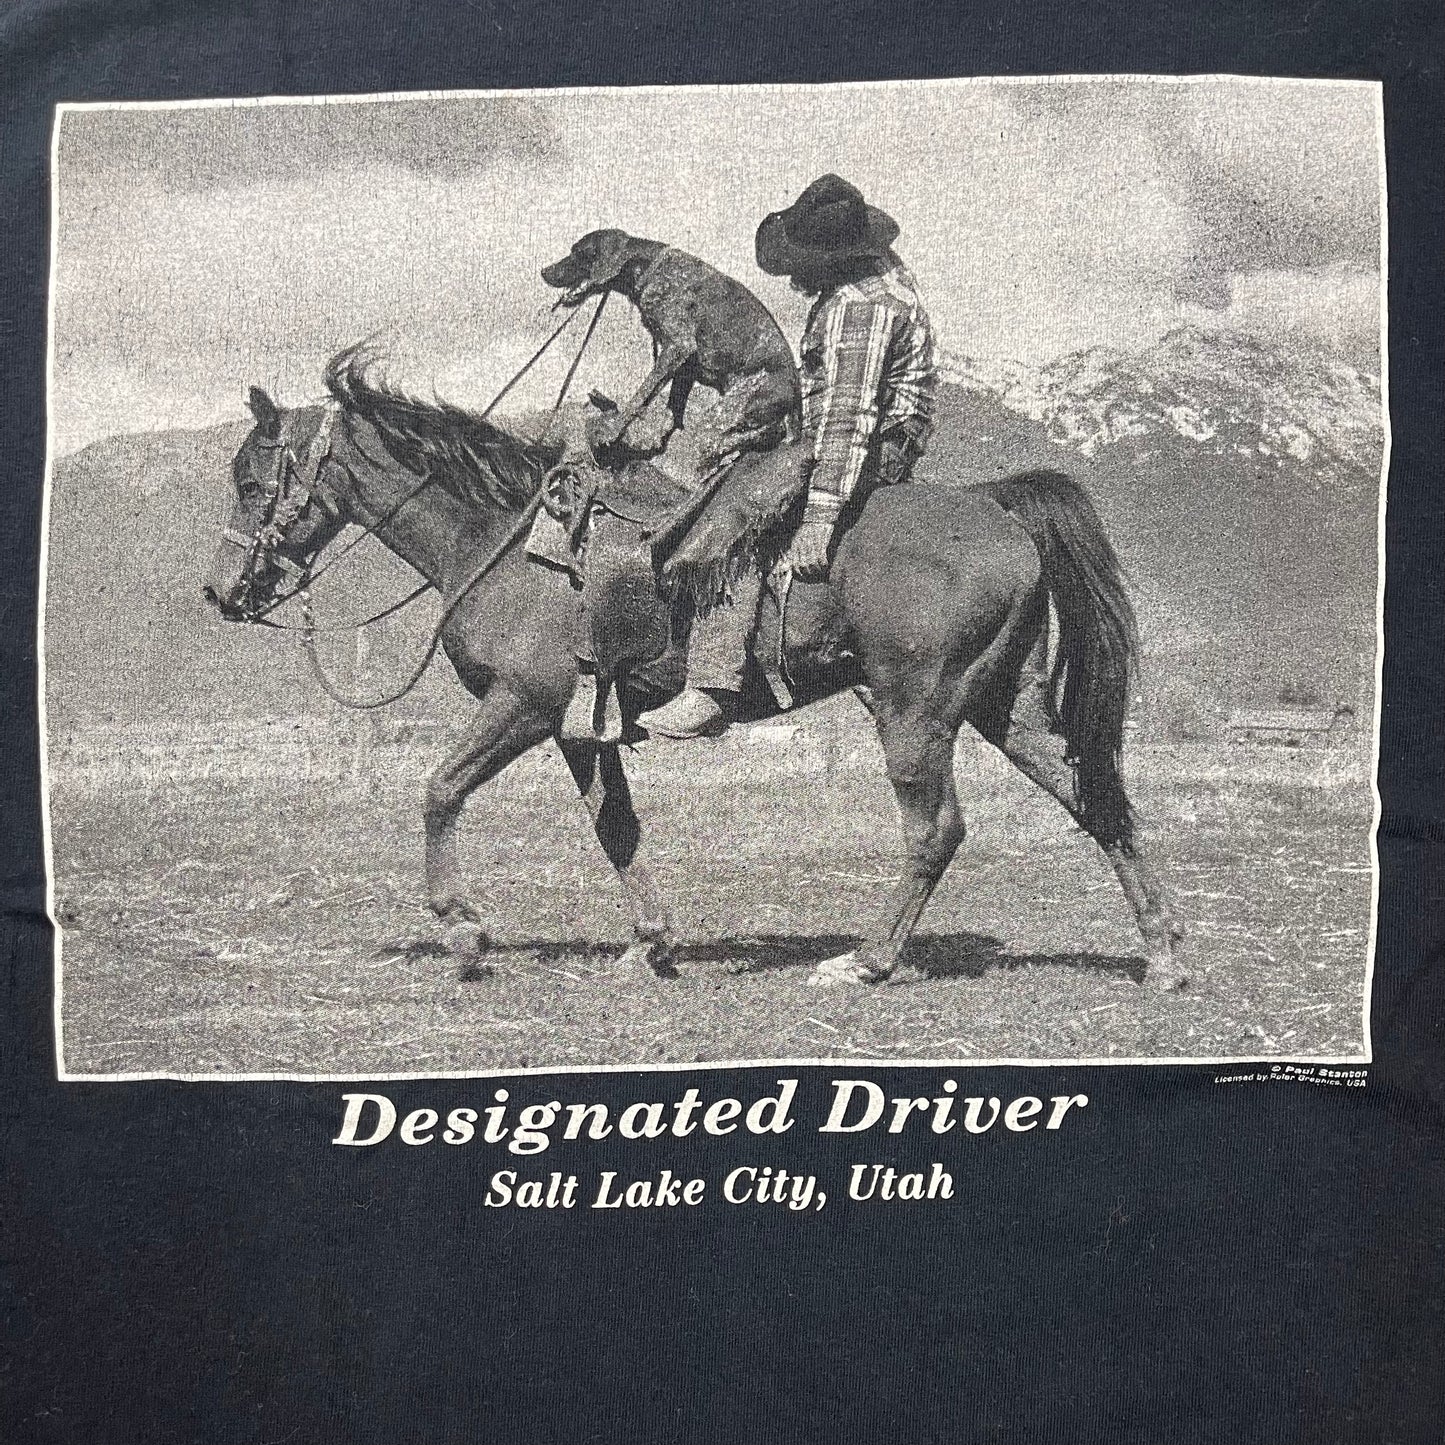 THRIFTED “DESIGNATED DRIVER” T-SHIRT